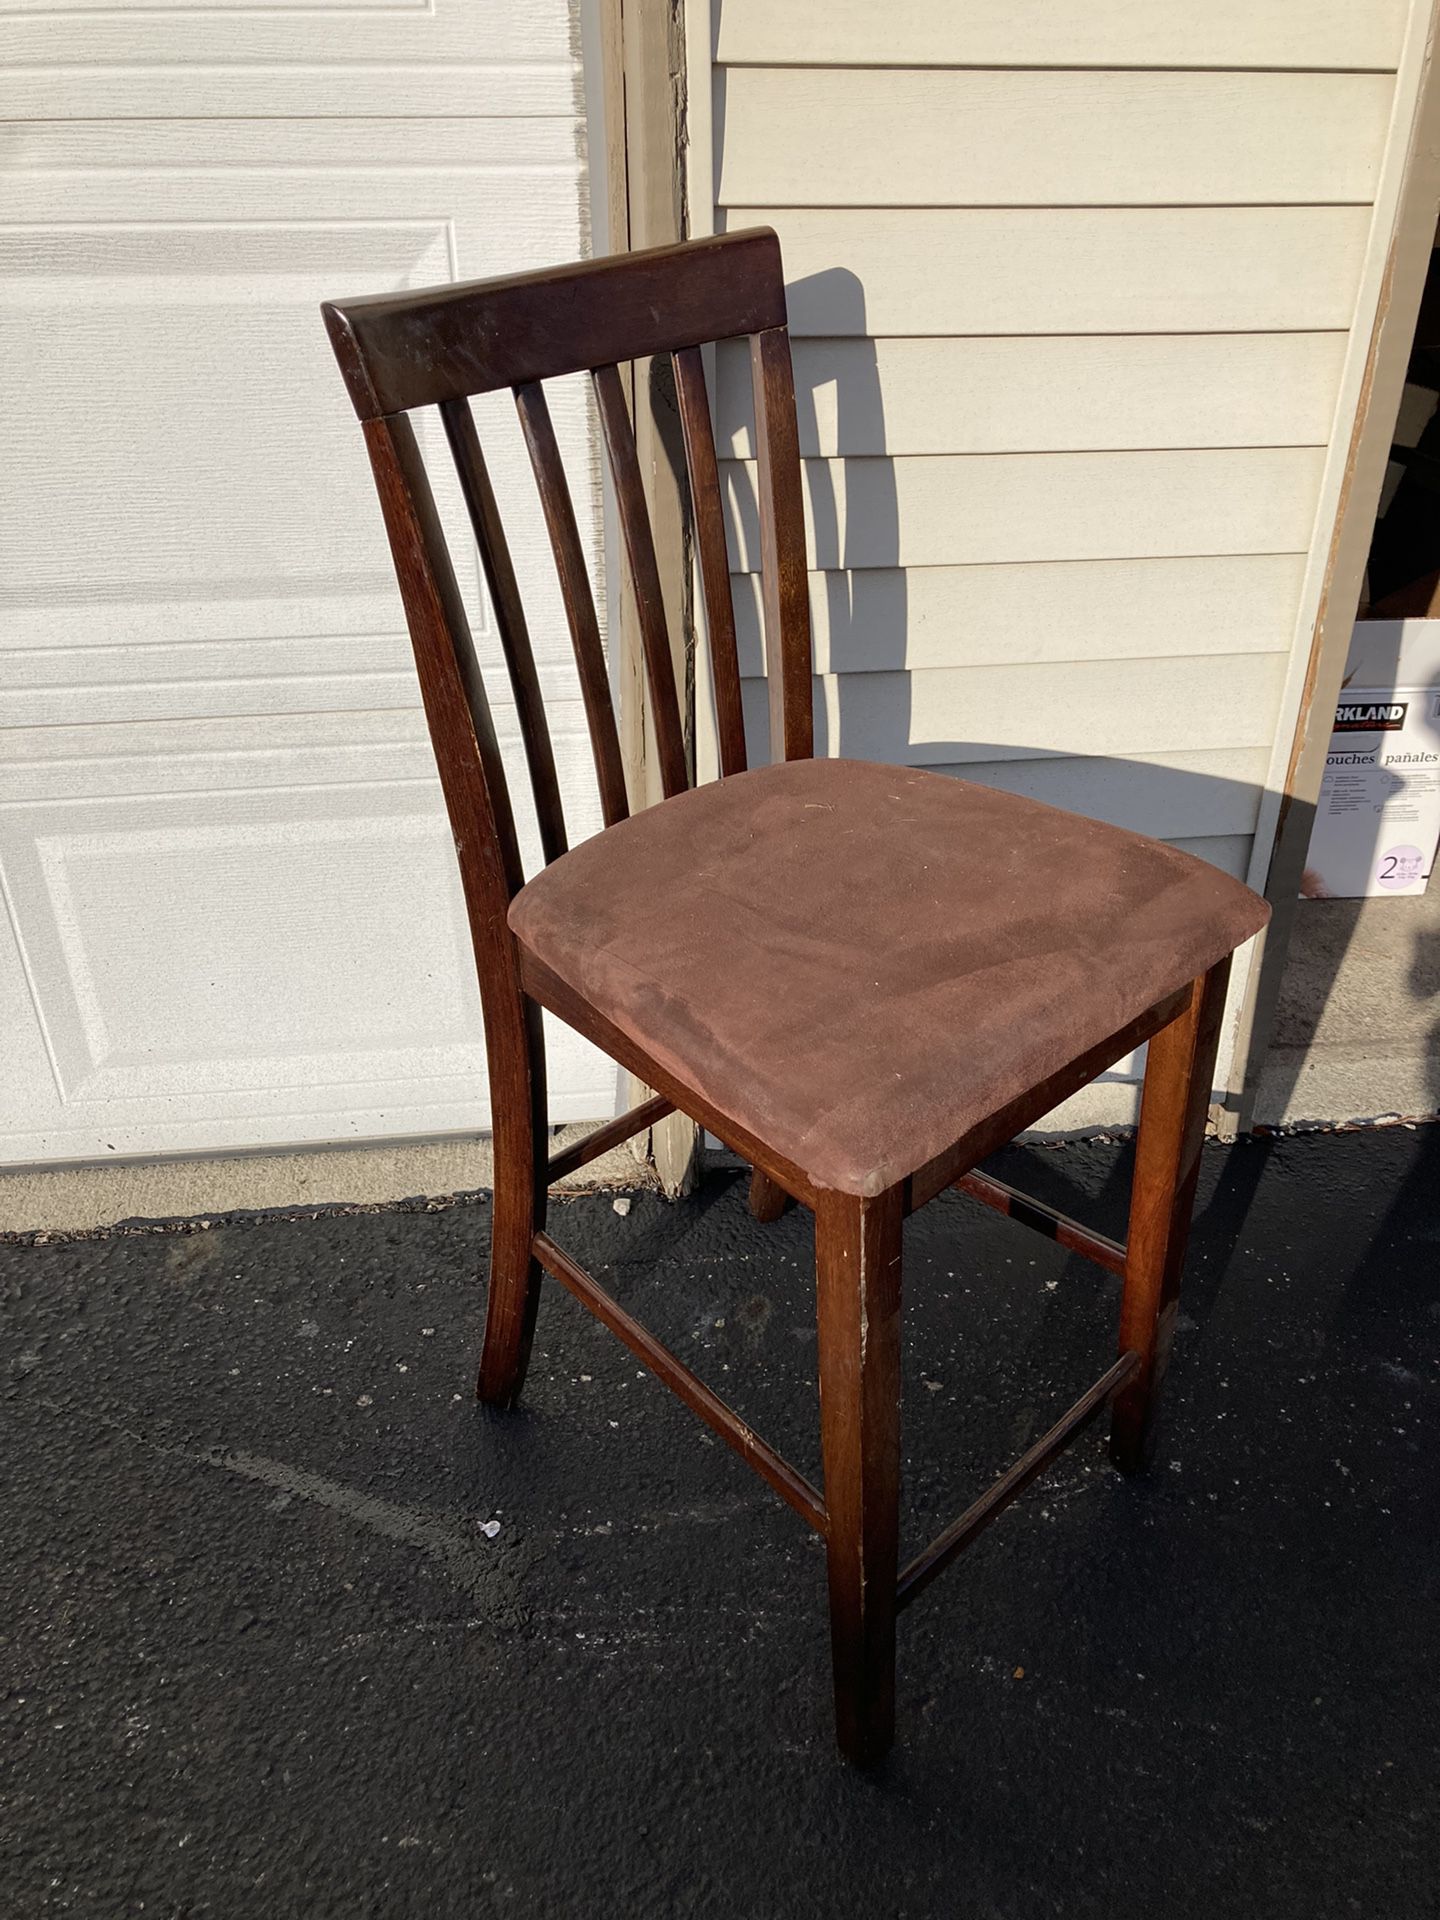 Counter Height Chairs, Wood Chairs, Set Of 3 Dining Chairs